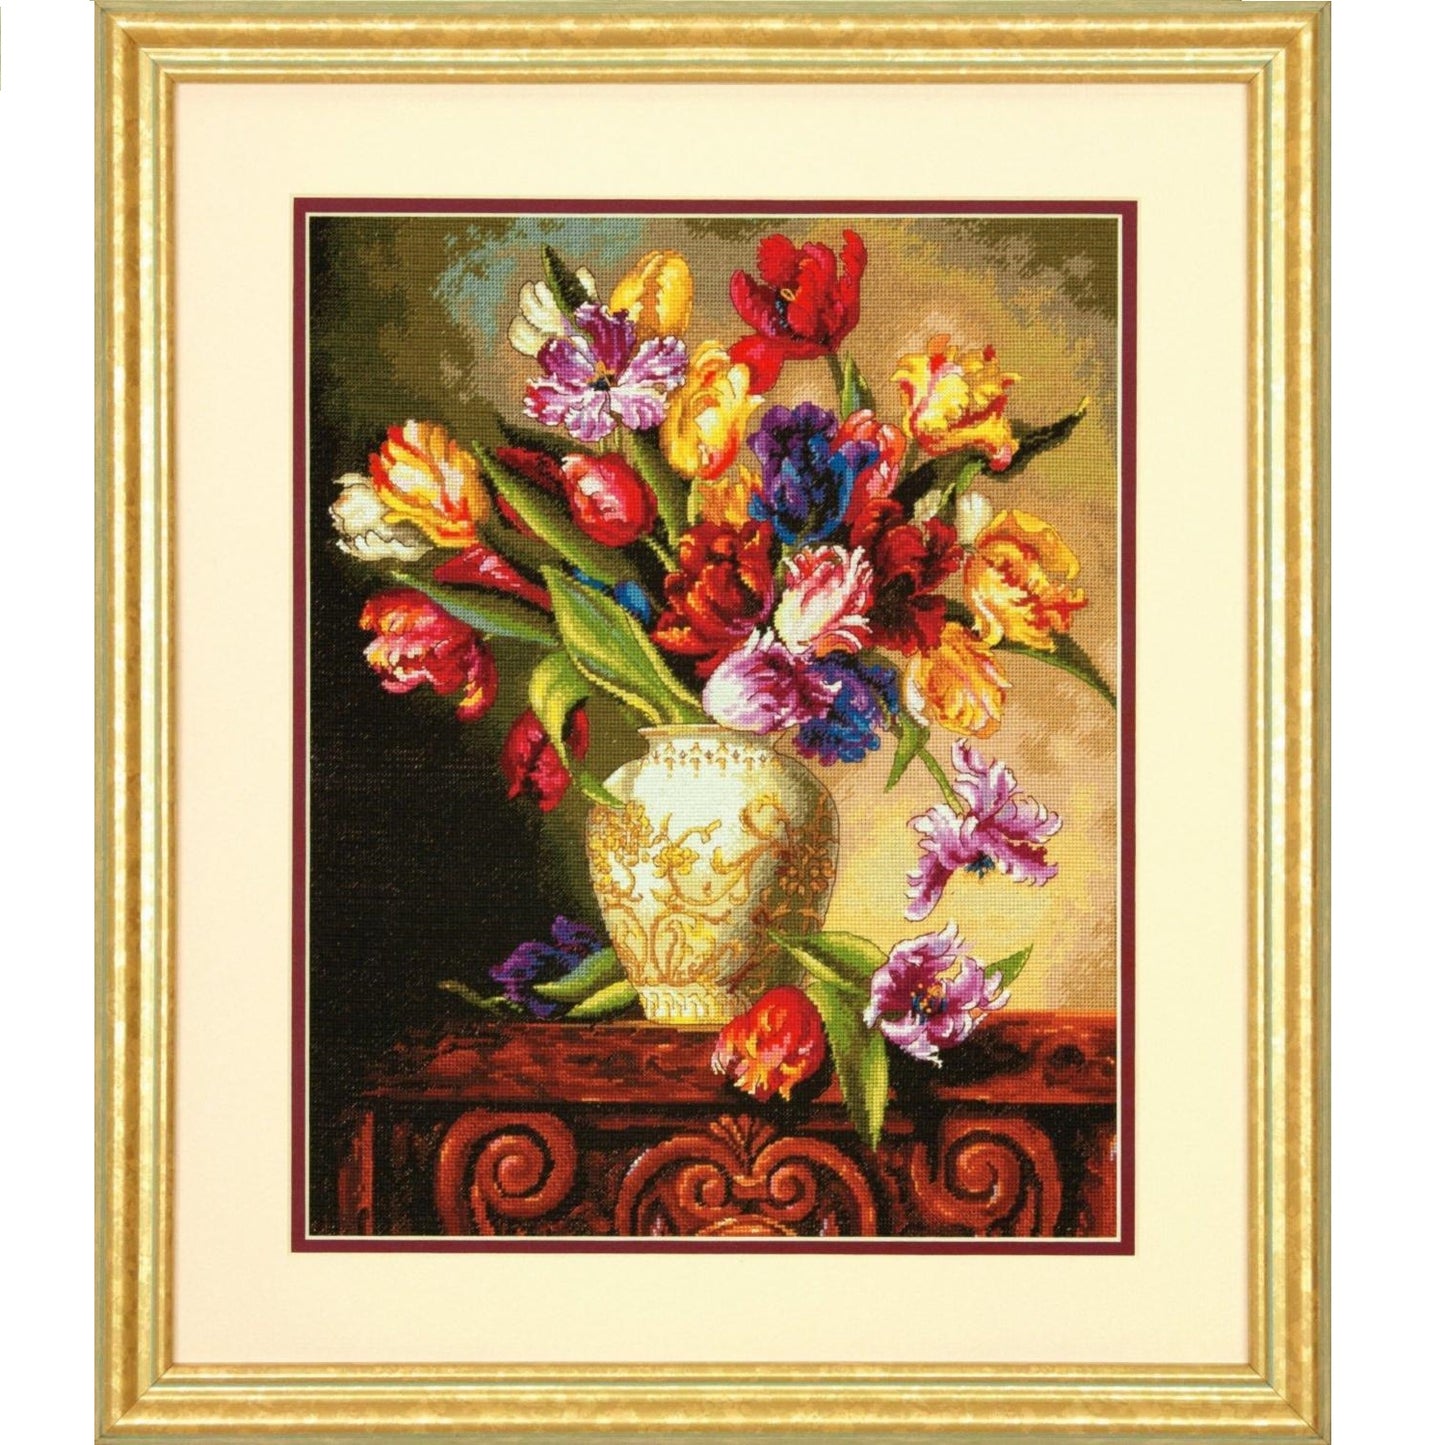 PARROT TULIPS, Counted Cross Stitch Kit, 18 count beige Aida, DIMENSIONS, Gold Collection (70-35305)